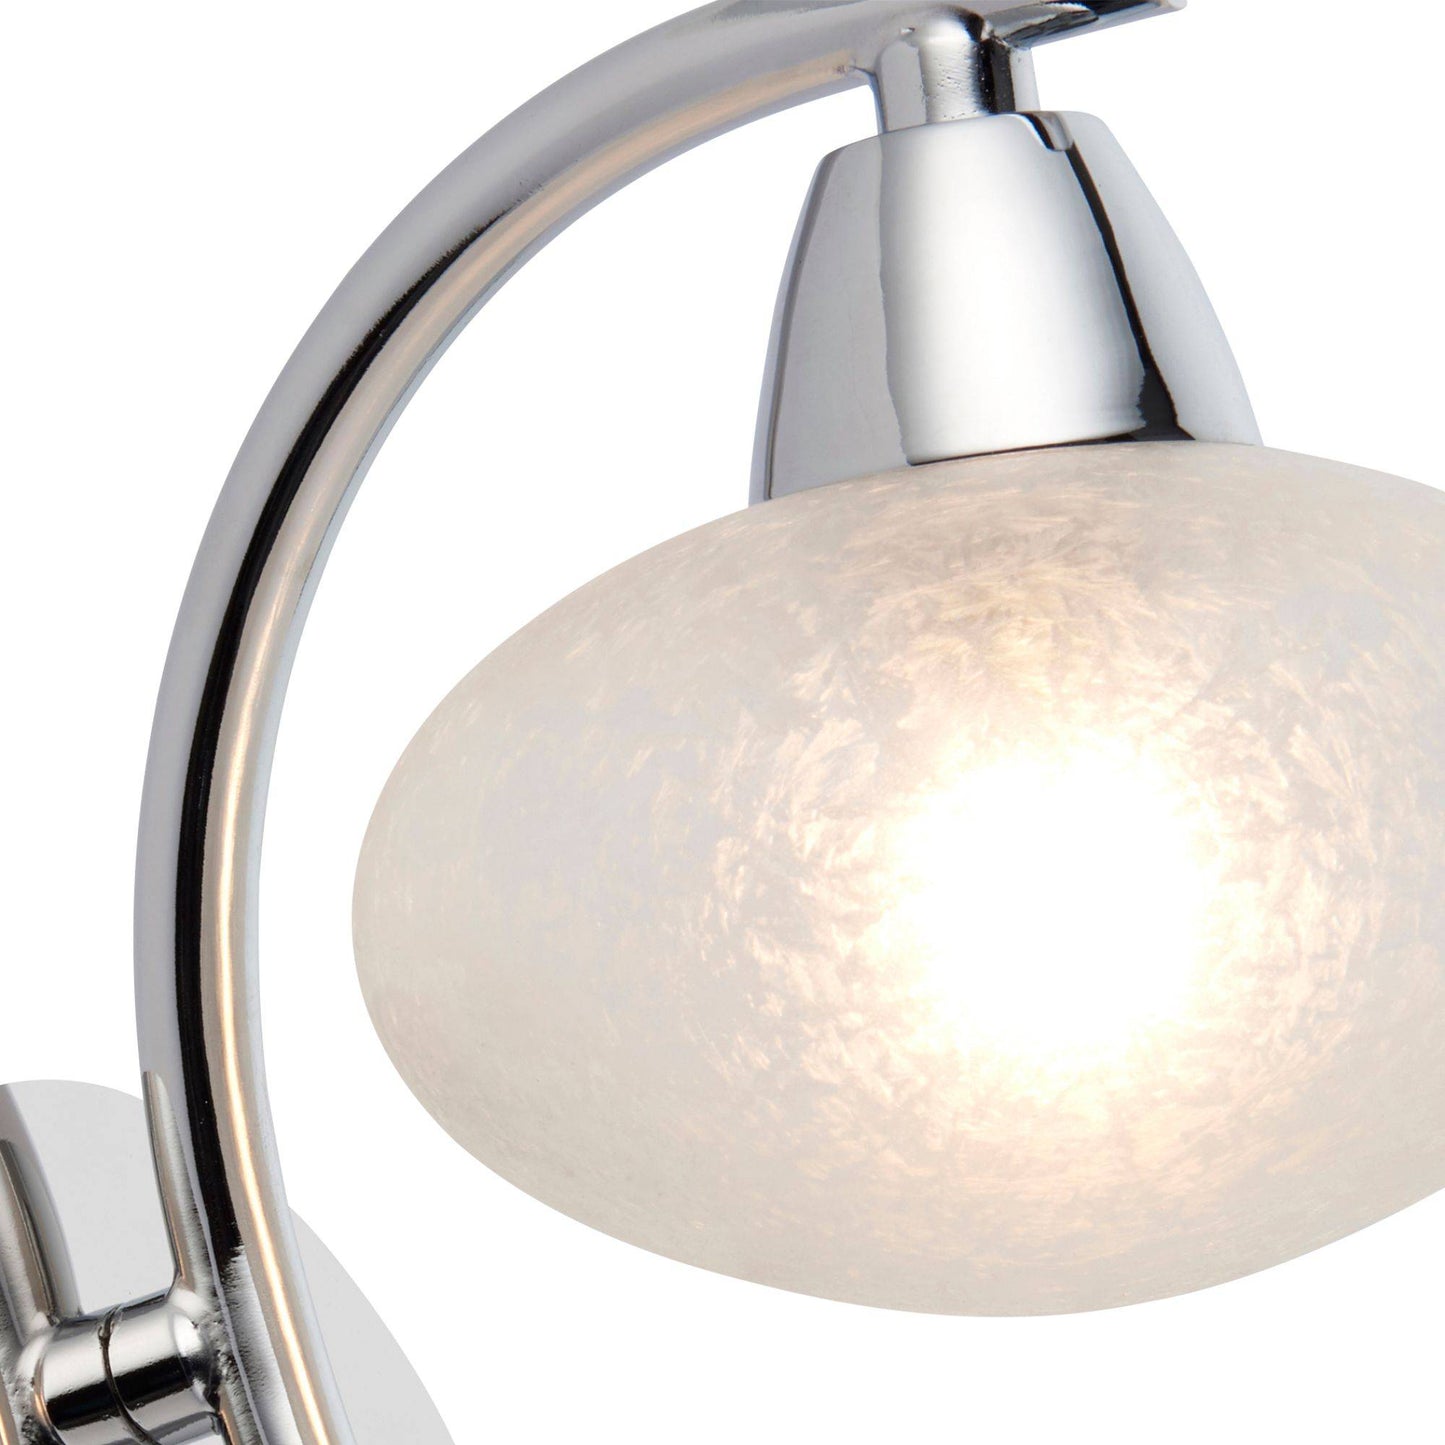 Sion 1 Light Polished Chrome Indoor Wall Light with a Frosted Glass Shade